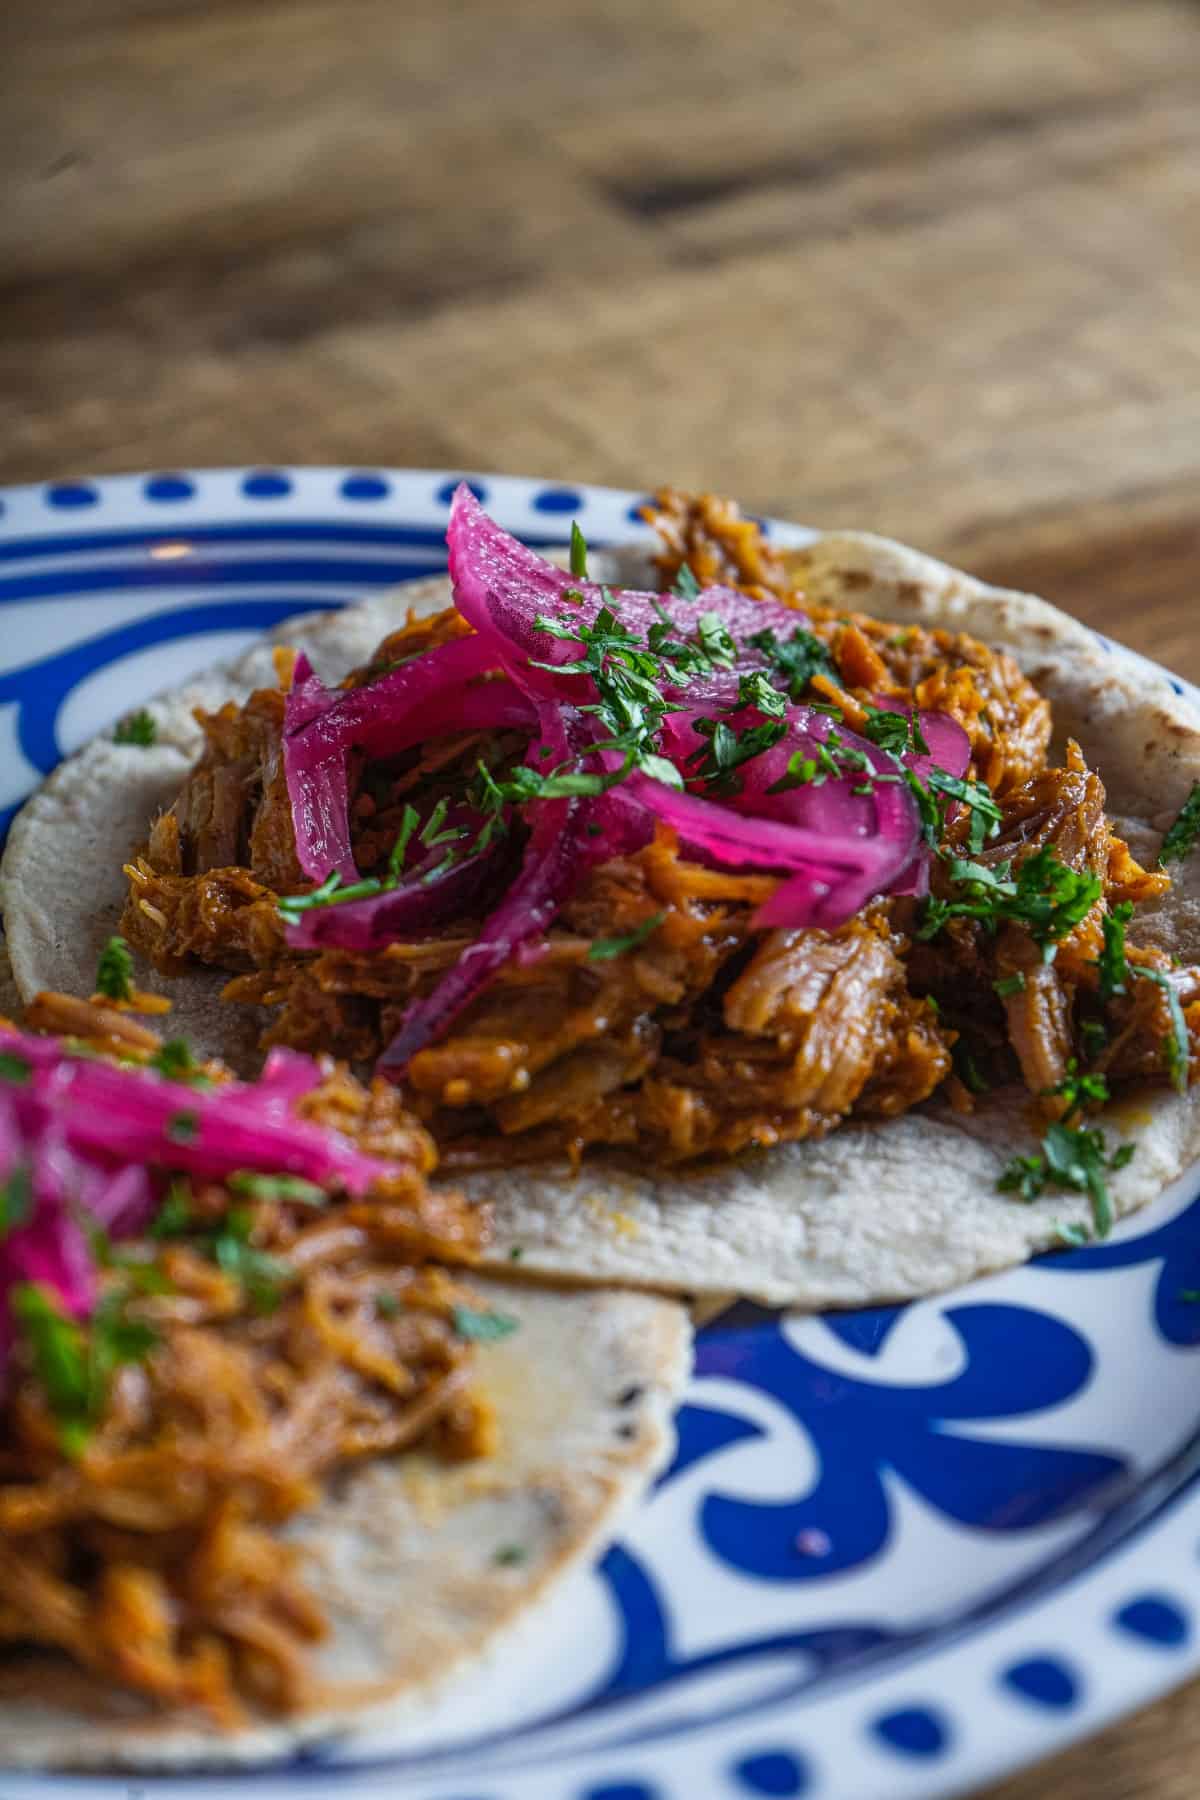 Cherry chipotle shredded pork tacos with pickled onions and cilantro on decorative blue and white plate.